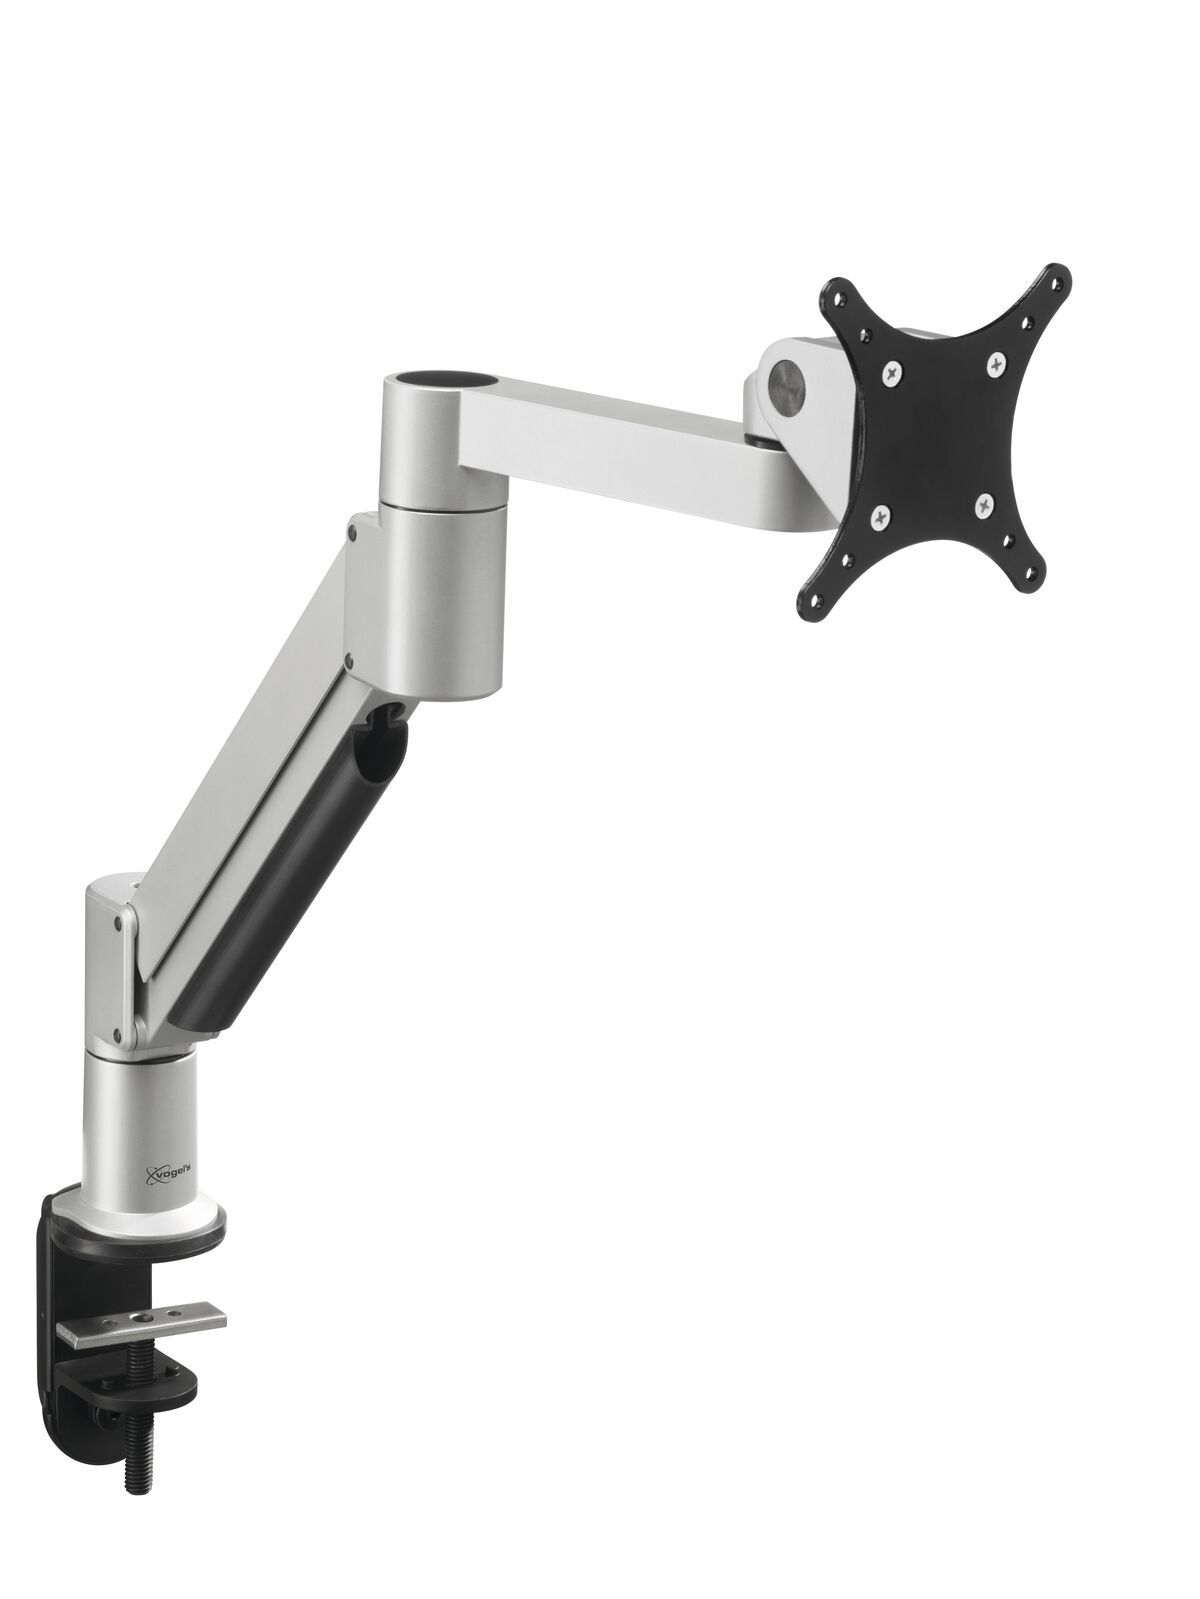 Vogel's PFD 8543 Monitor mount dynamic silver - For monitors up to 11 kg - Ideally suited for Gaming and (Home) Office - Product